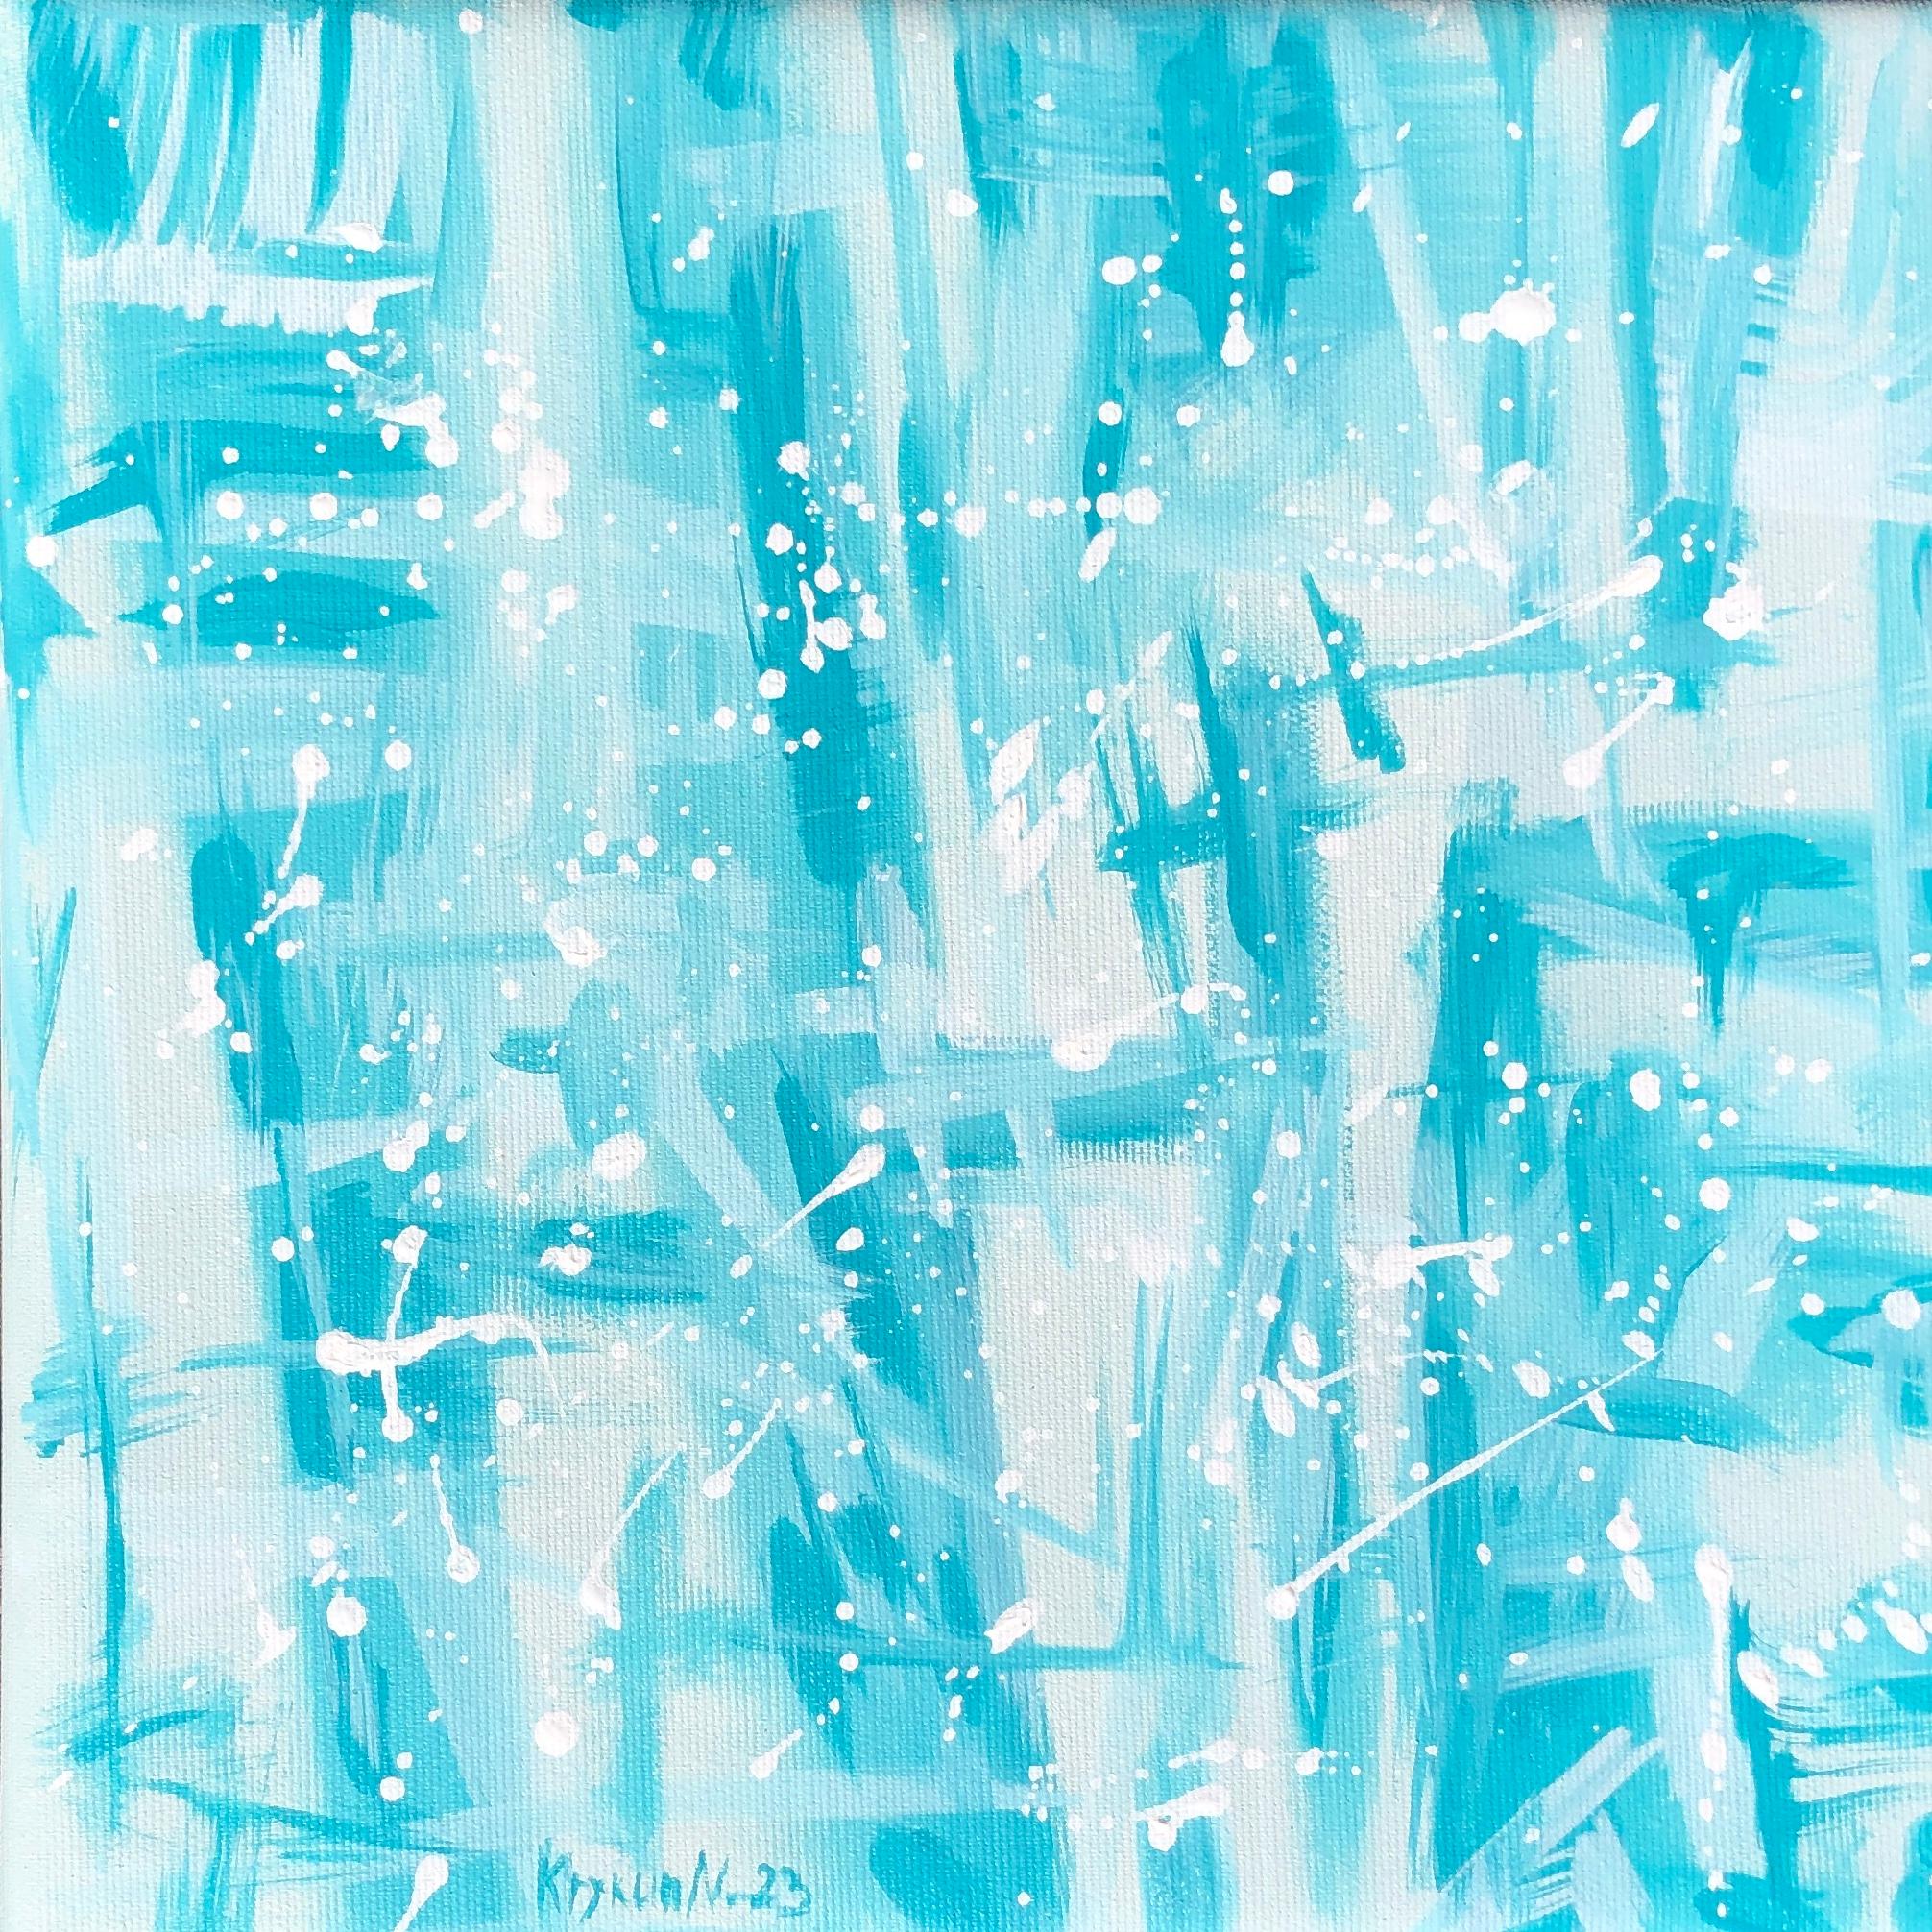 Nataliia Krykun Abstract Painting - „Blue seascape“ - blue , white, turquoise geometric abstraction